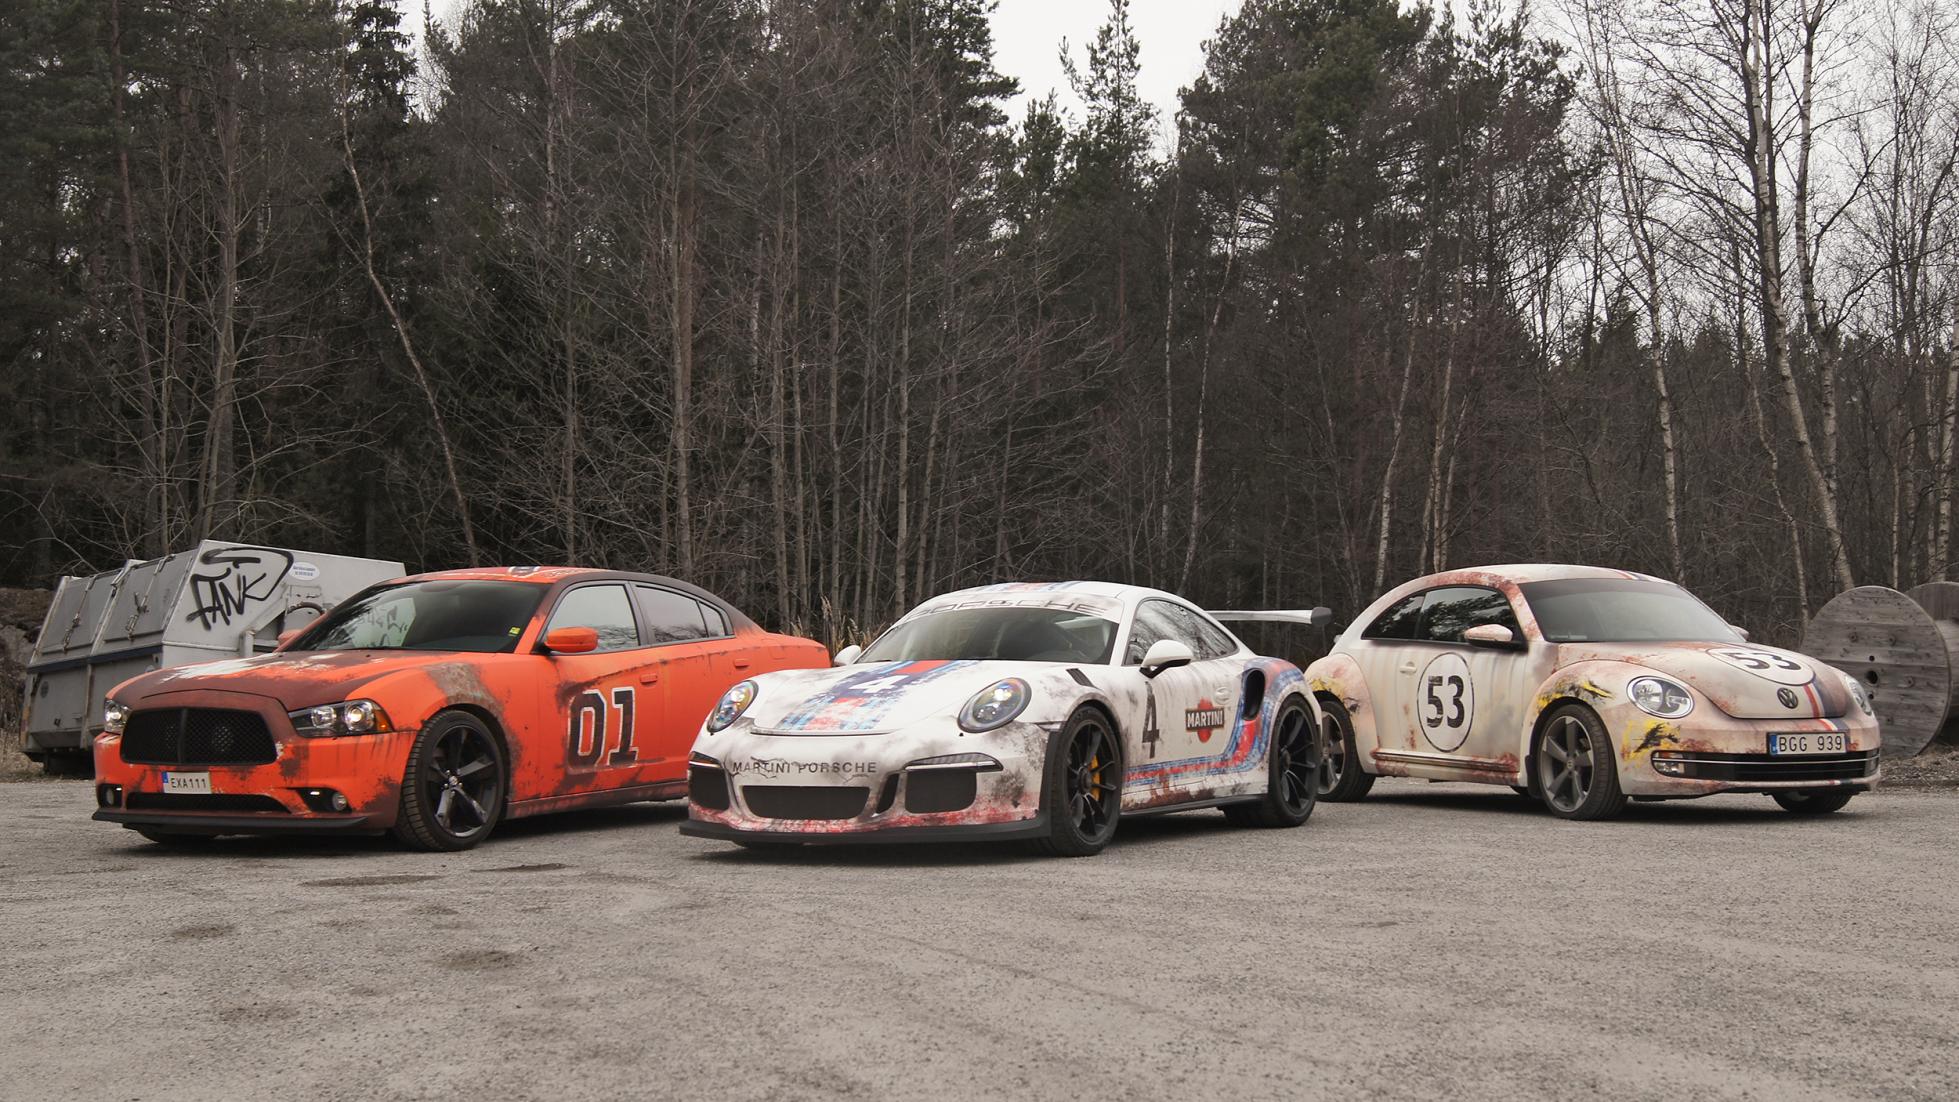 Bloody Nora!! Look at these maaaaaad wraps. I want that GT3 RS so badly feel free to use them as wallpaper